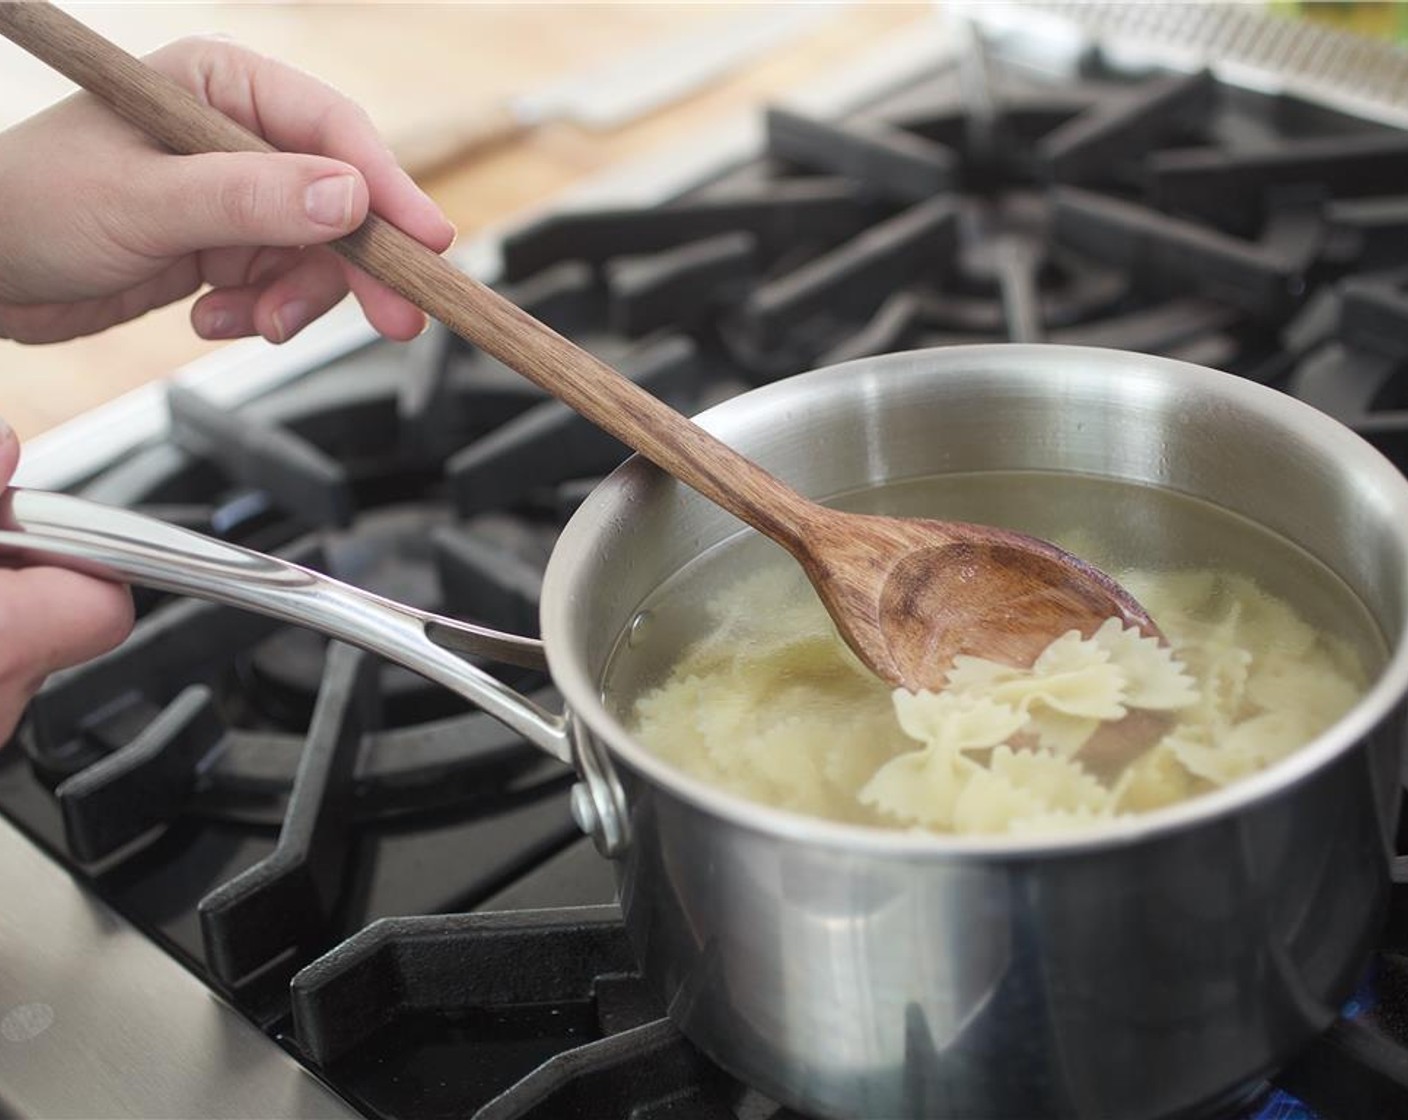 step 5 When water comes to a boil, add Farfalle Pasta (6 oz). Cook for 12 minutes, or until desired texture. Reserve two tablespoons of the pasta water. Drain the pasta into a colander and return to the pot.